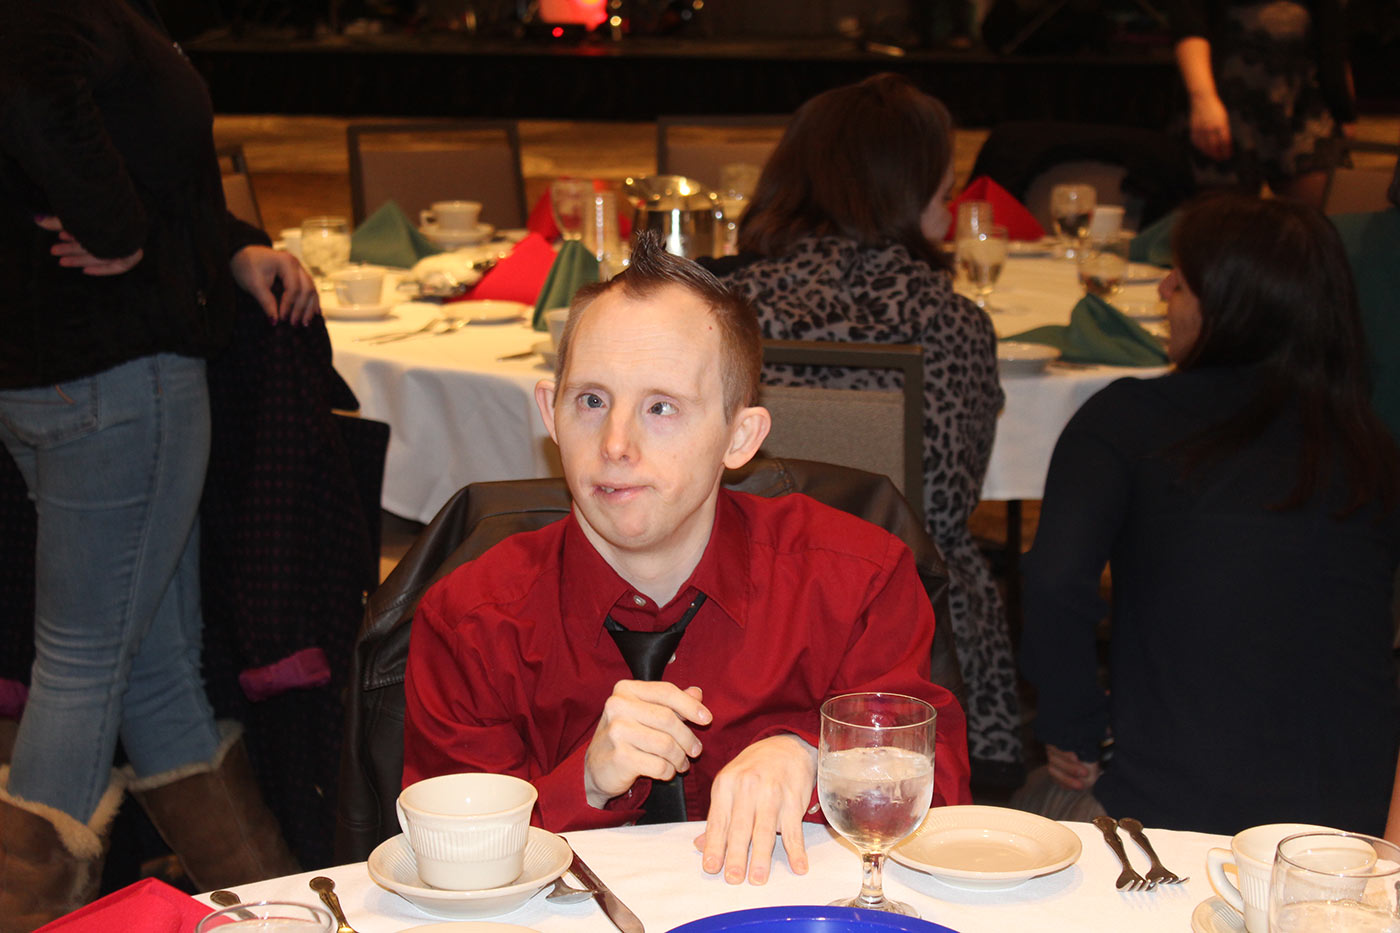 Man in red shirt seated at table